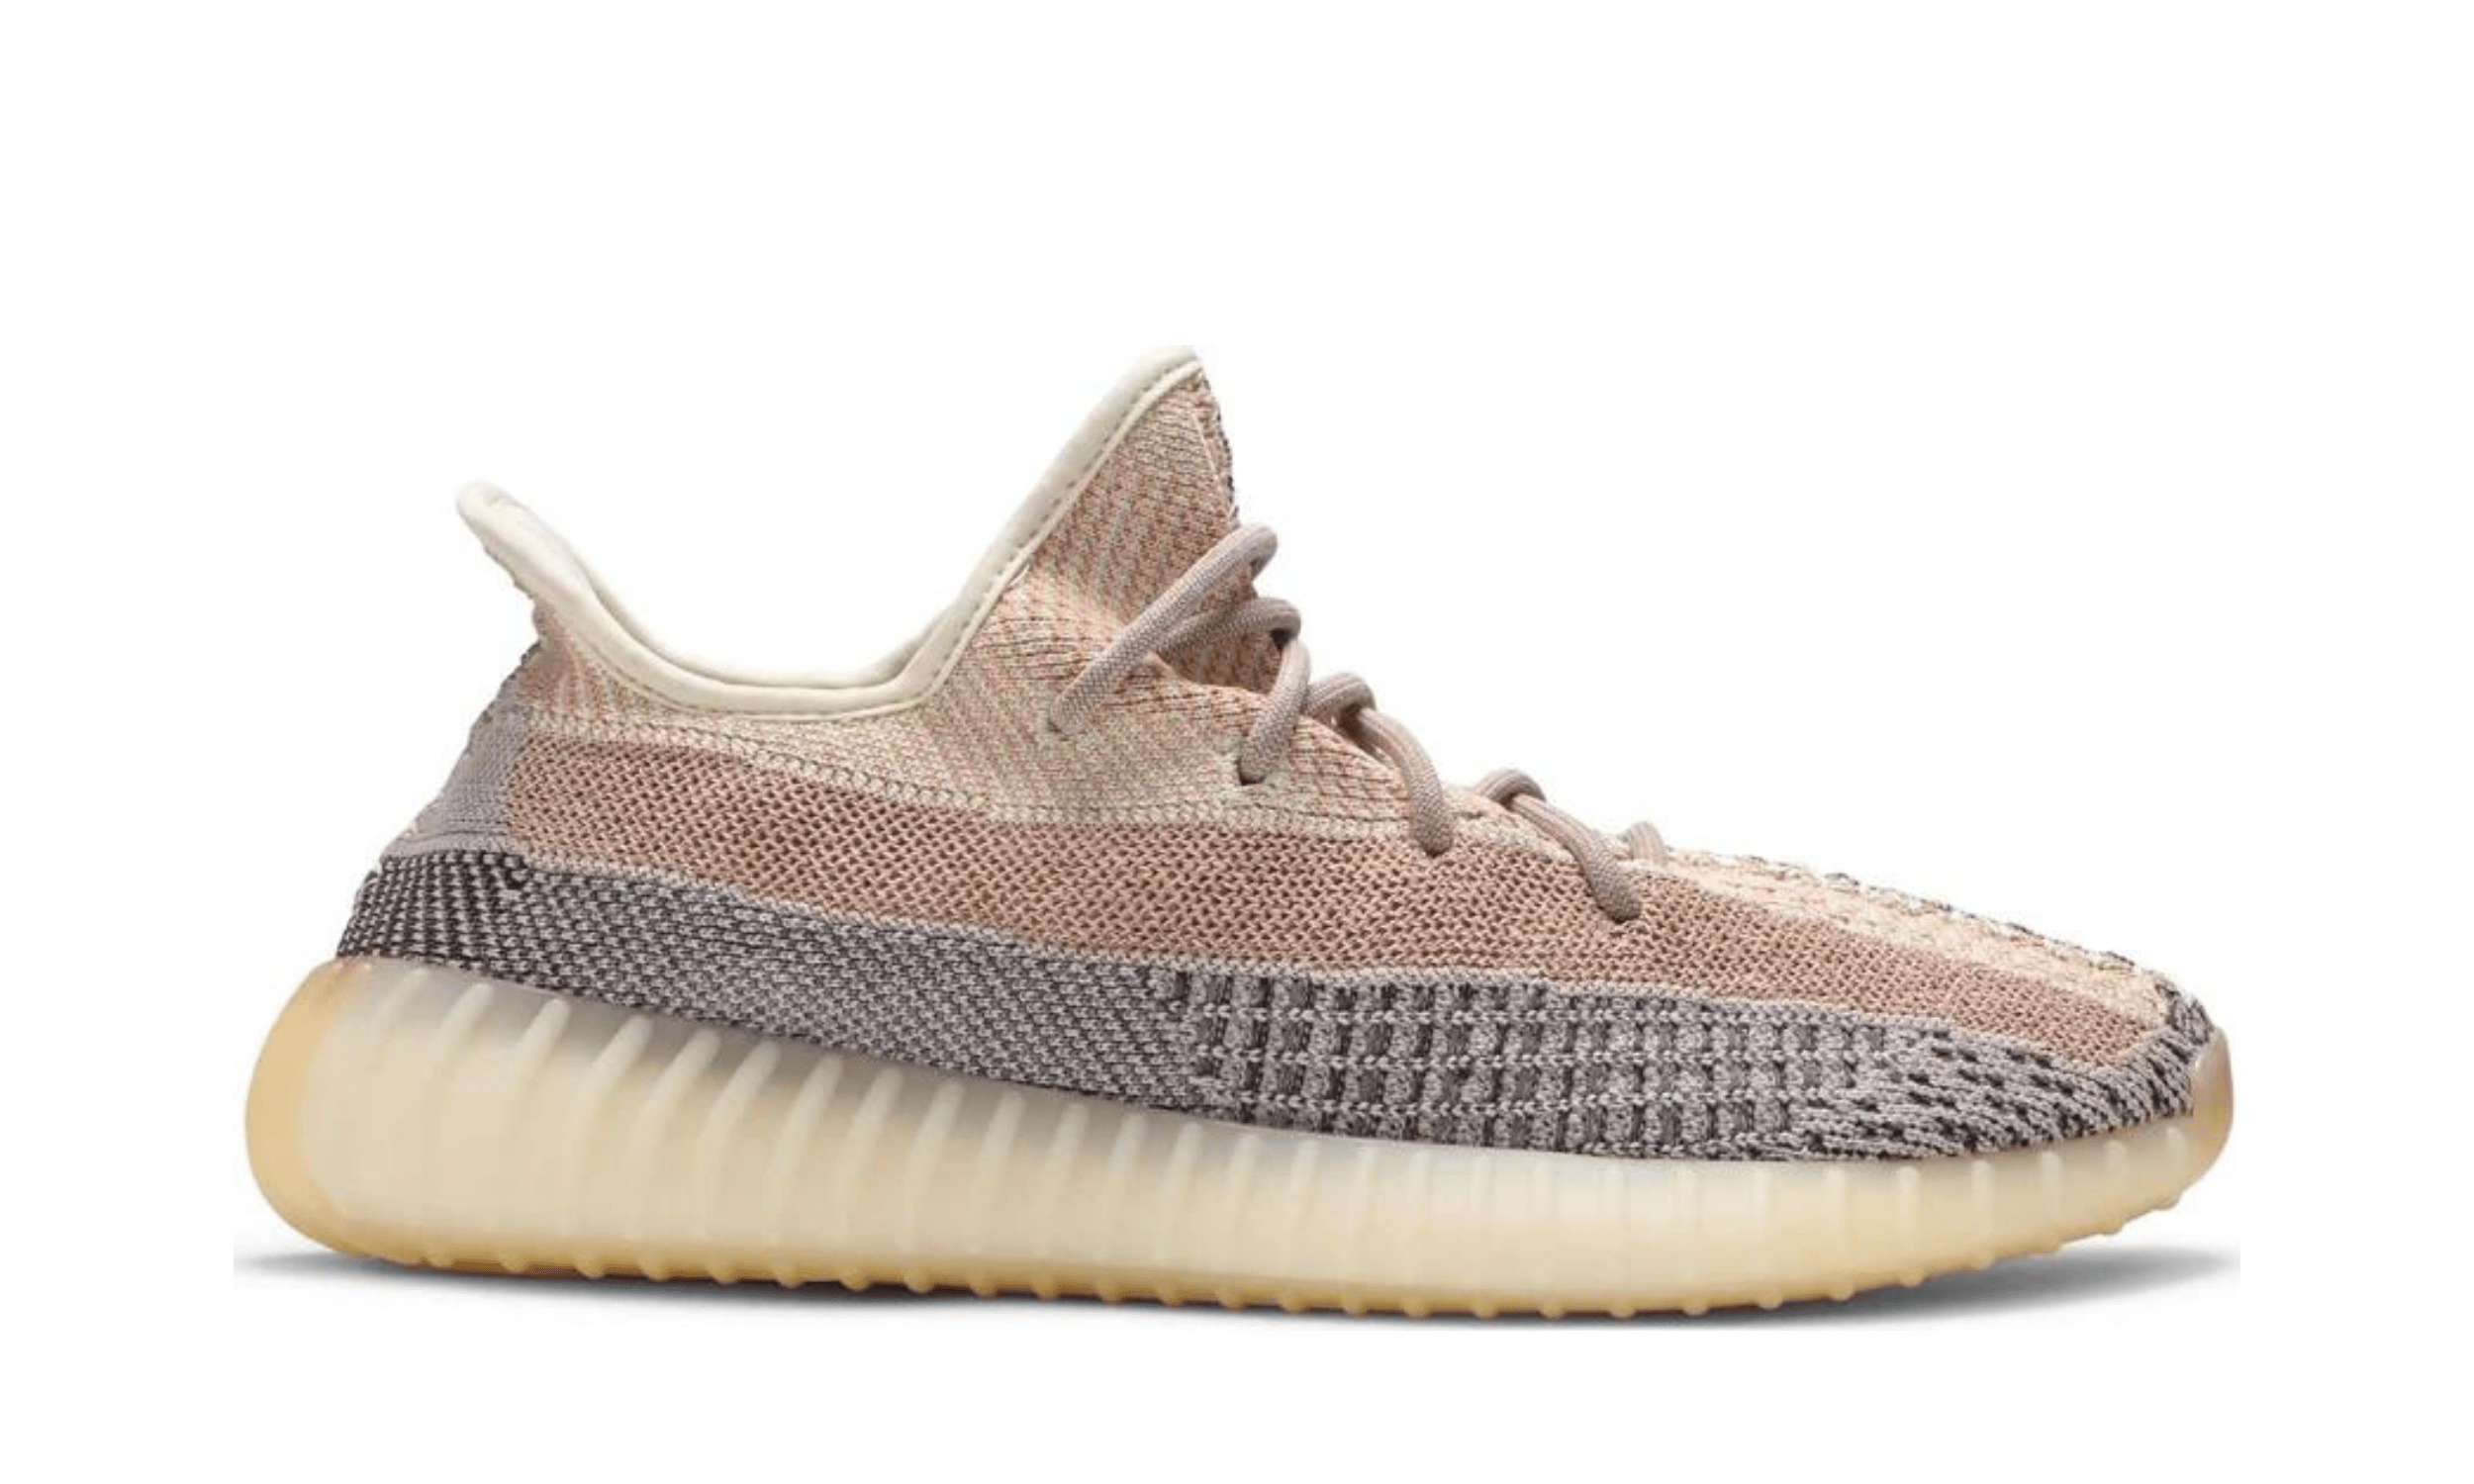 Yeezy Boost 350 V2 Ash Pearl - Kicksite - GY7658